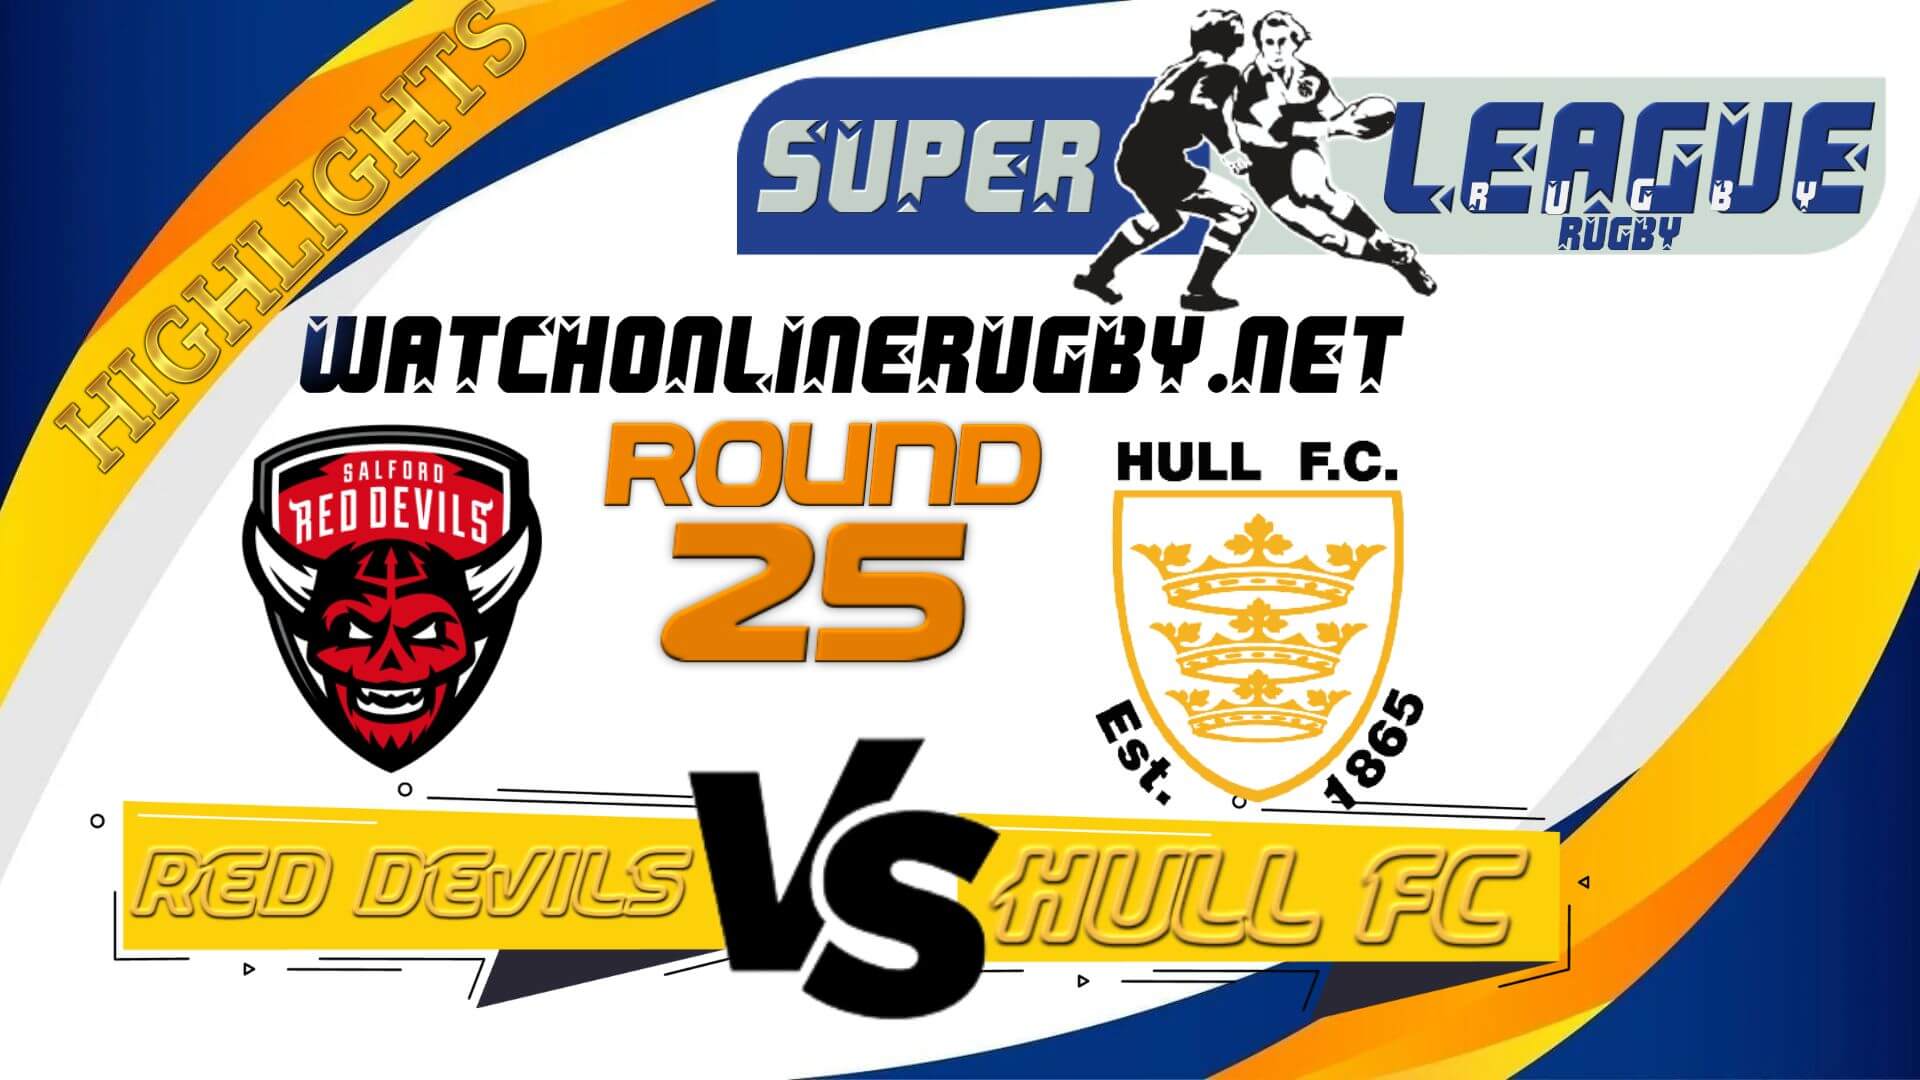 Salford Red Devils Vs Hull FC Super League Rugby 2022 RD 25